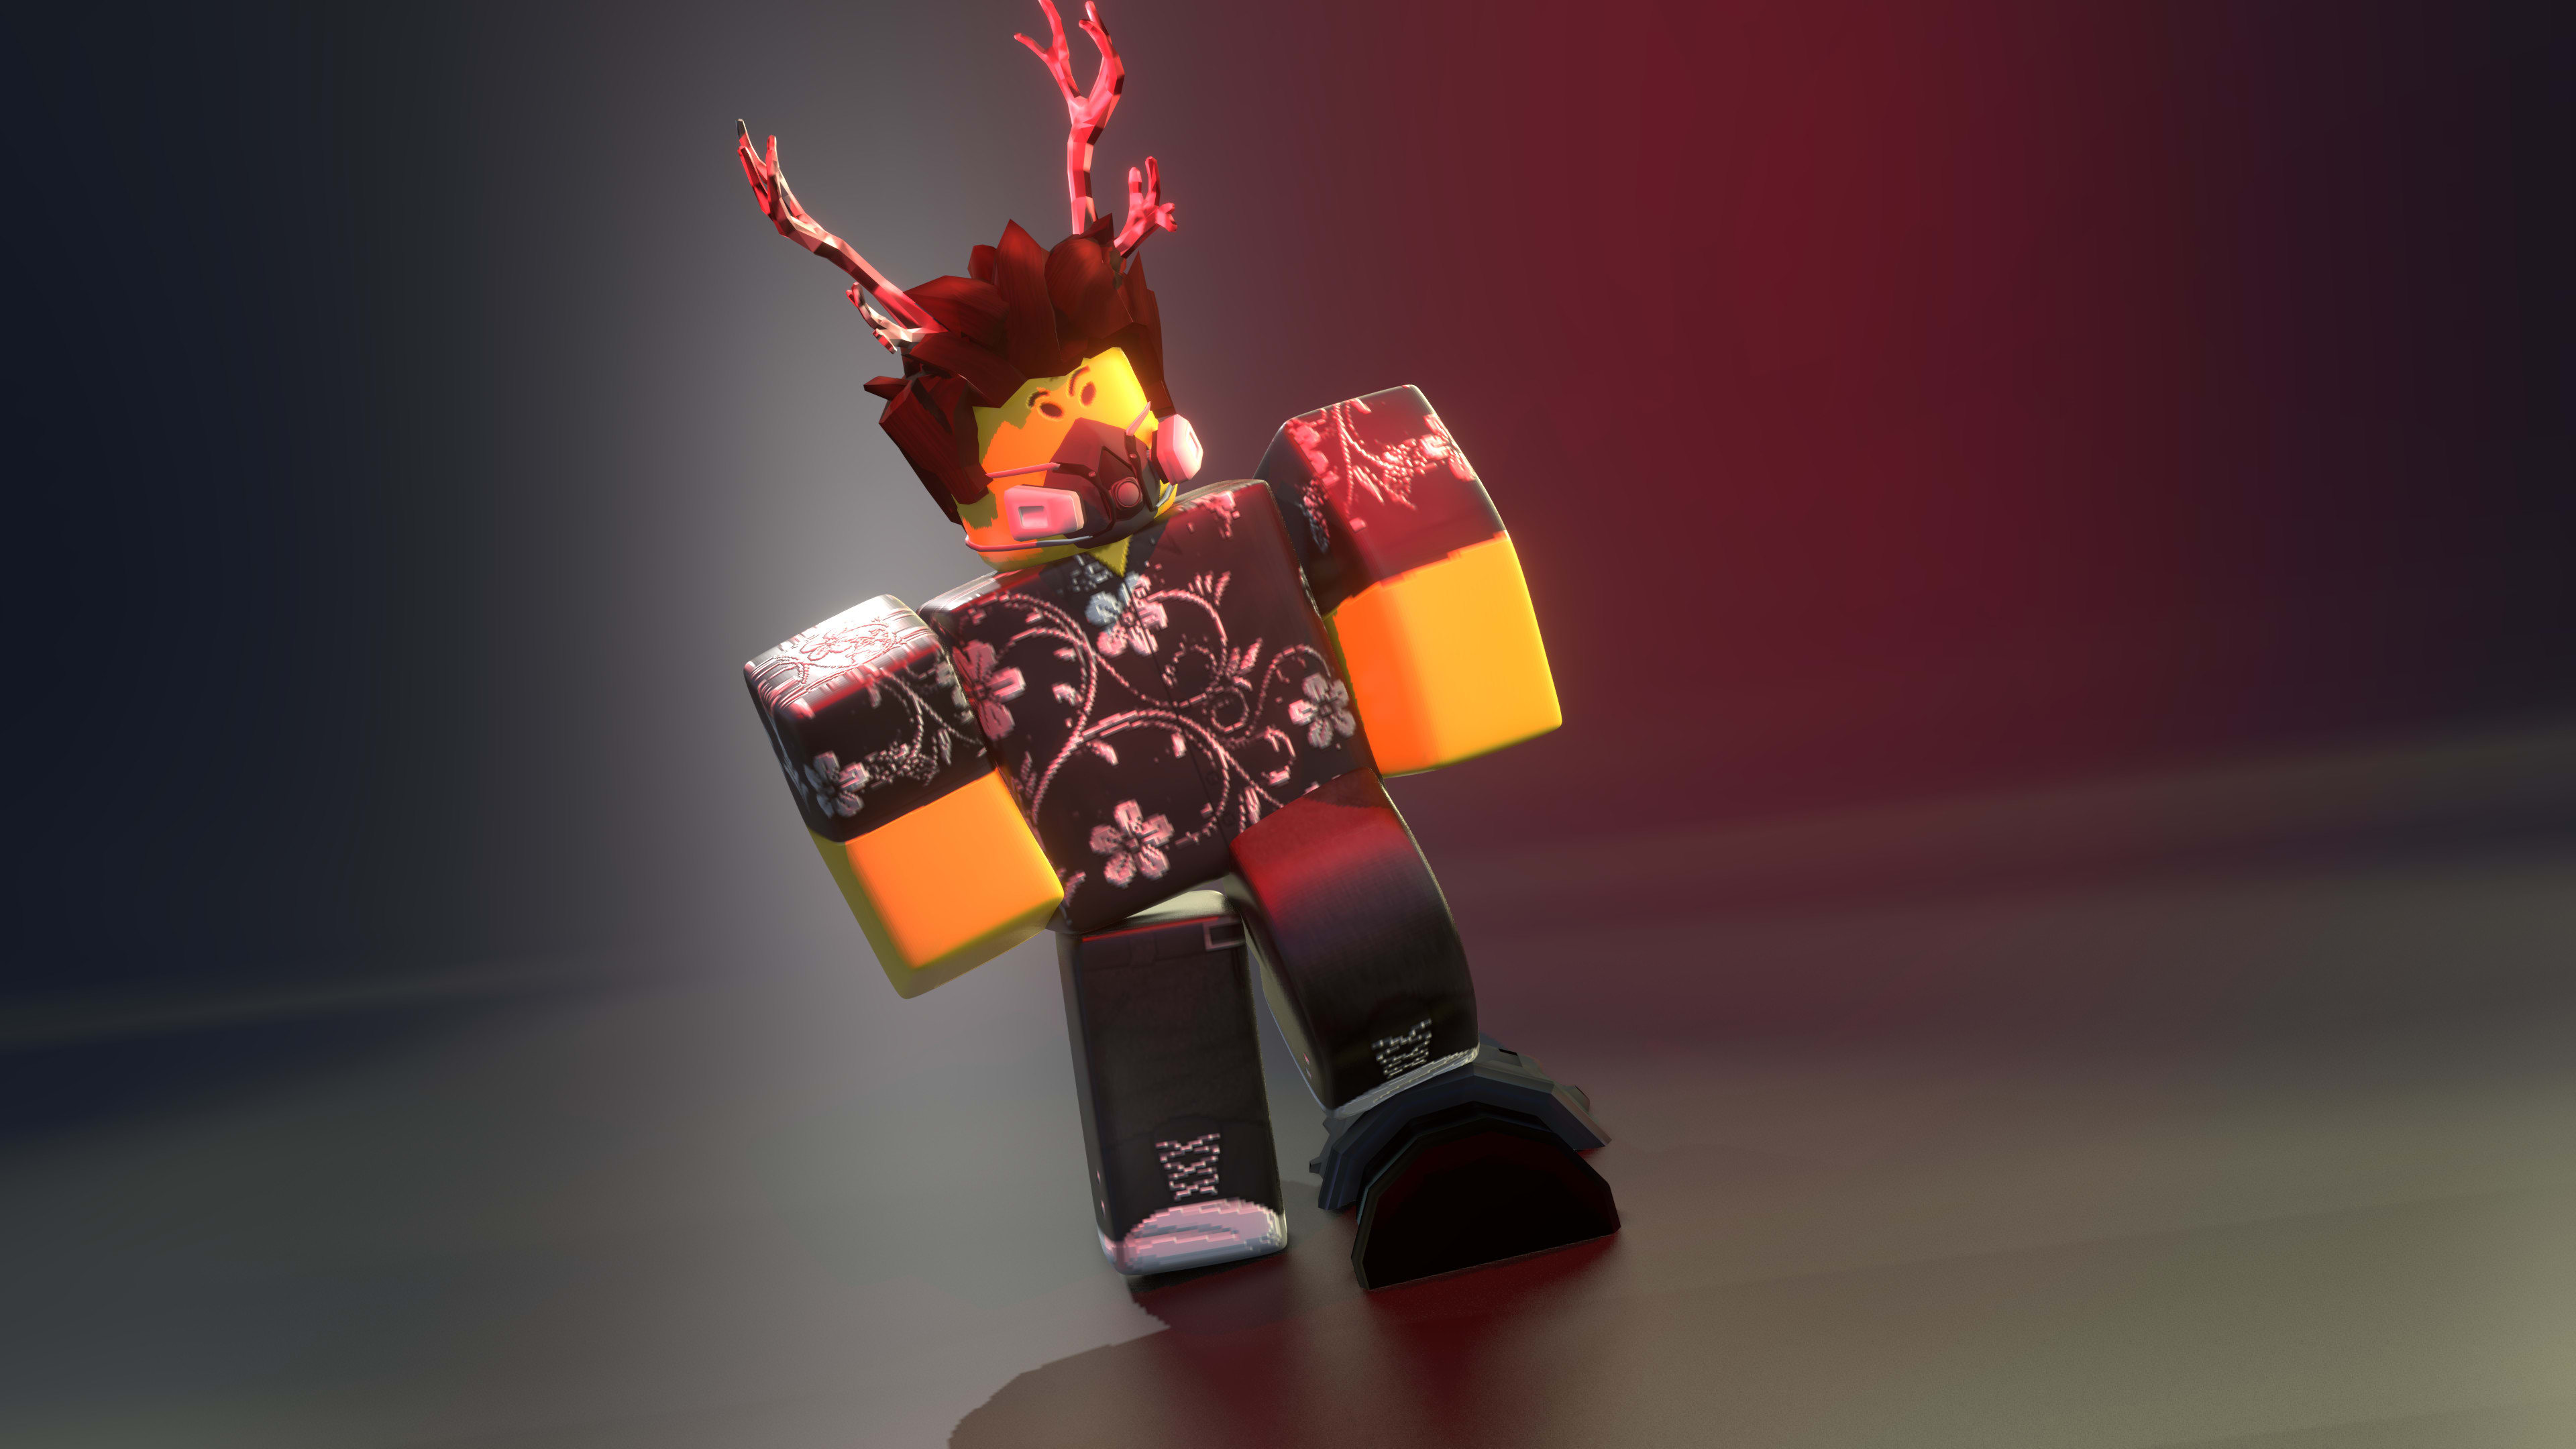 Make you a roblox 3d hd gfx out of your roblox avatar by Robloxmakerr